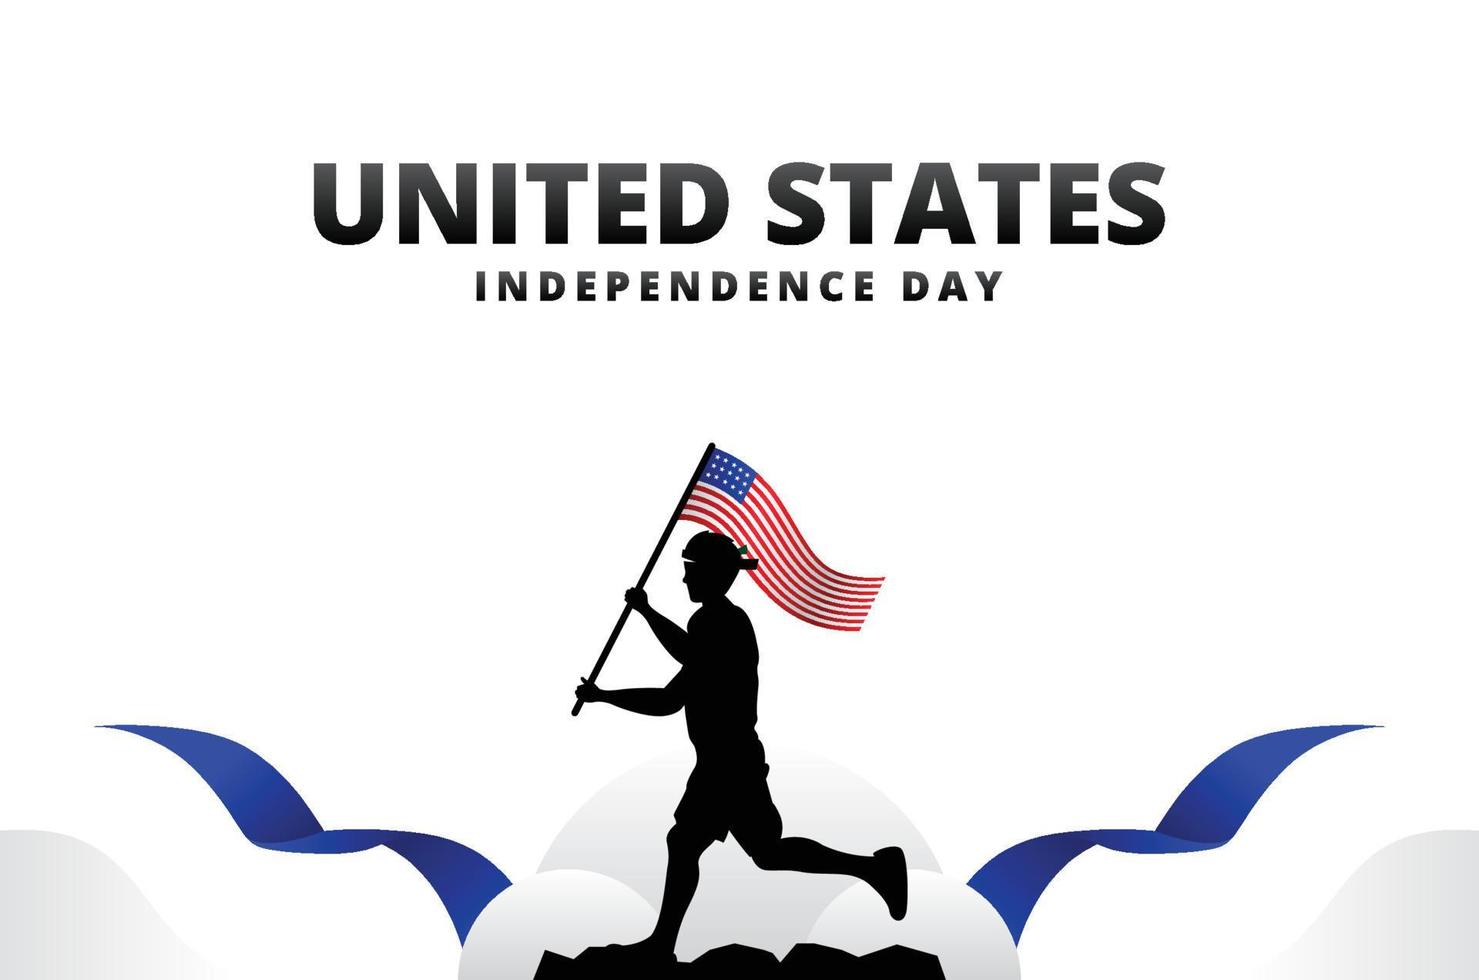 United State Independence Day vector